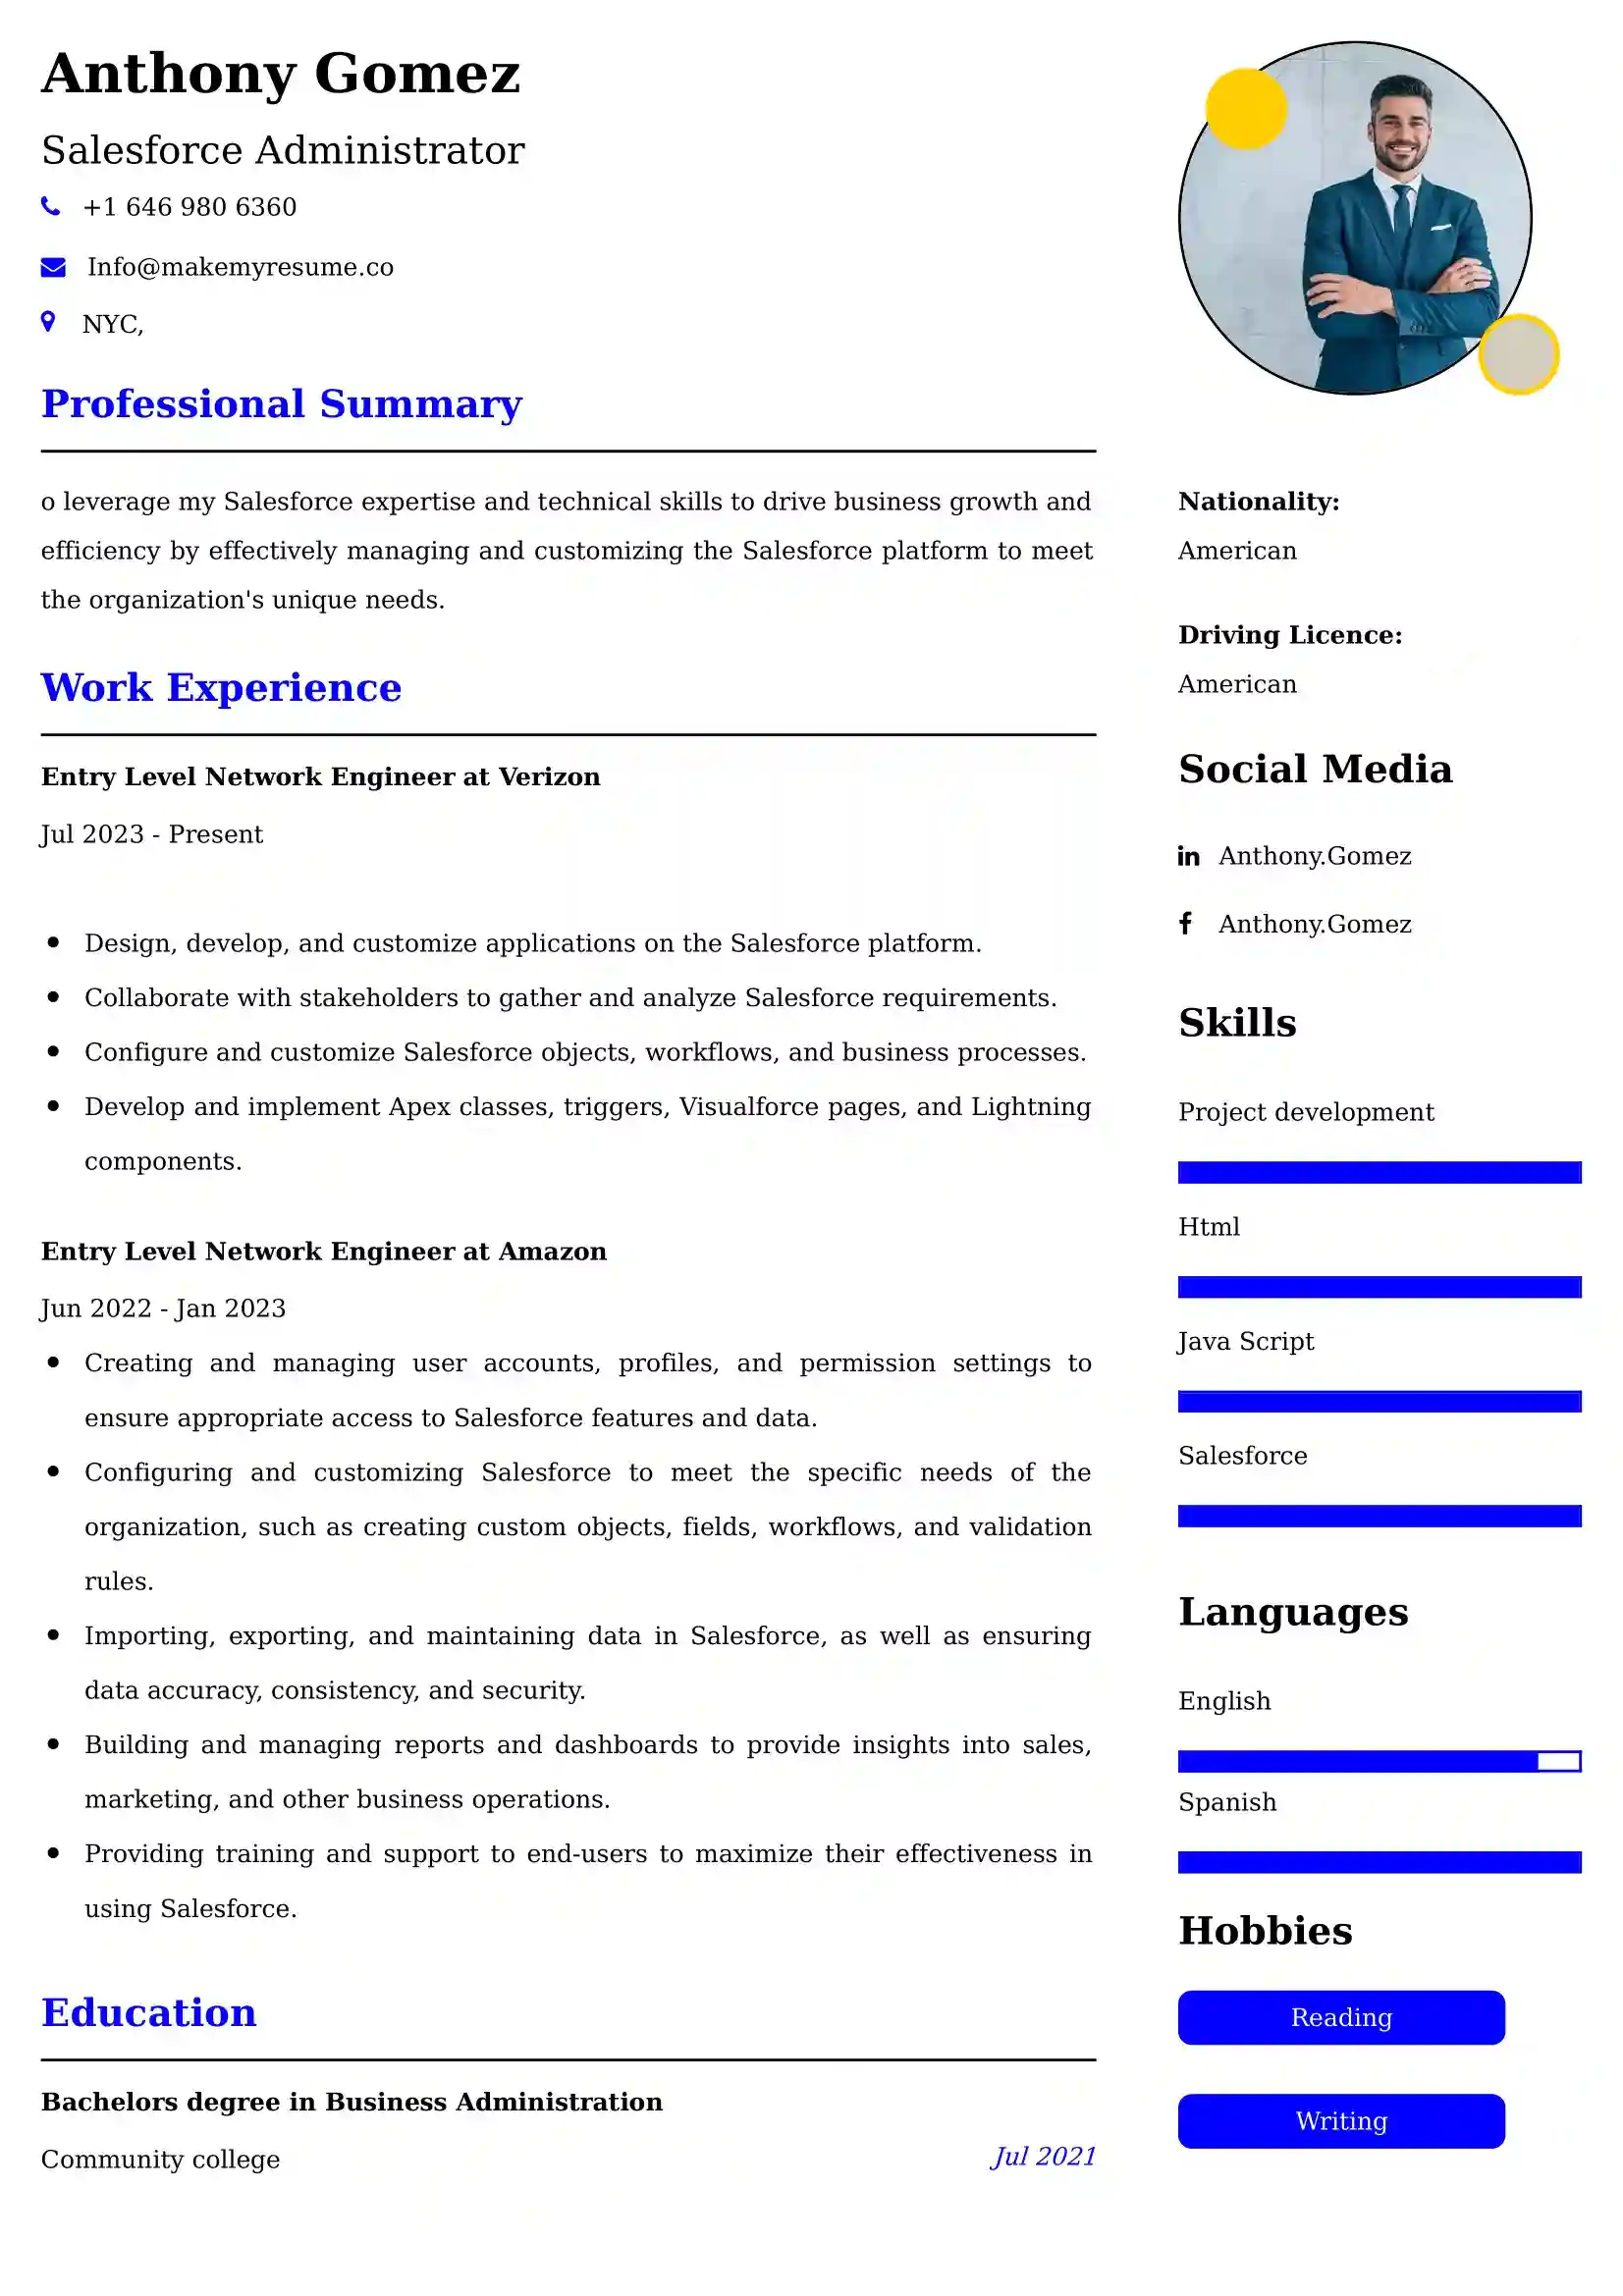 Salesforce Administrator Resume Examples - Australian Format and Tips